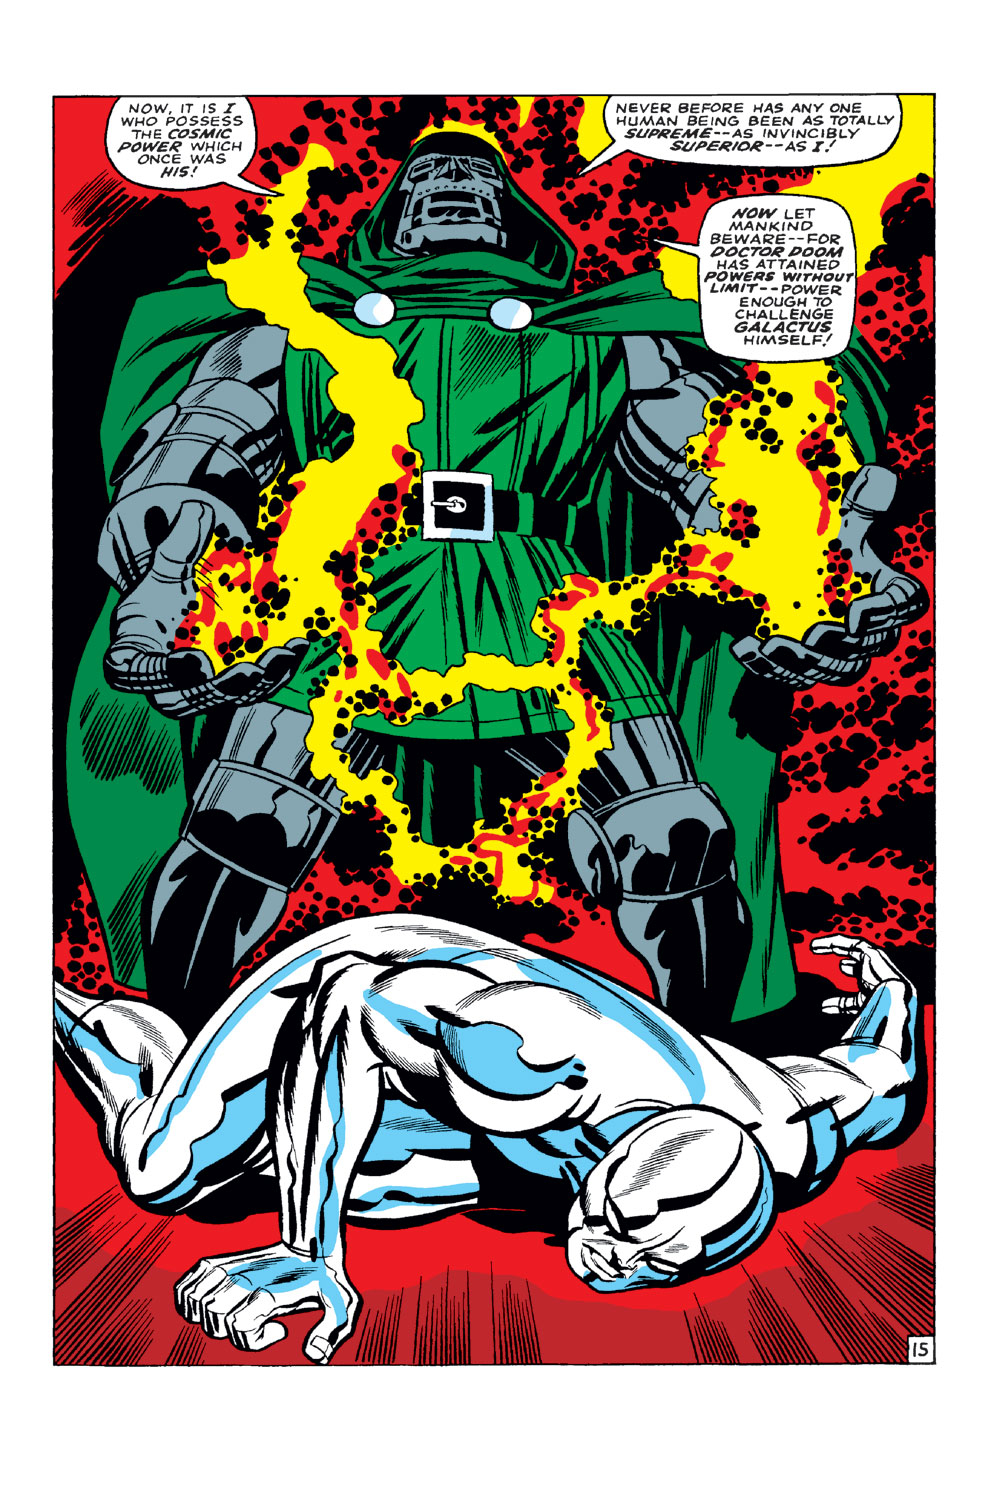 In 'Fantastic Four #57' (1968), Doctor Doom uses high intensity inductors to steal the Silver Surfer's Power Cosmic.